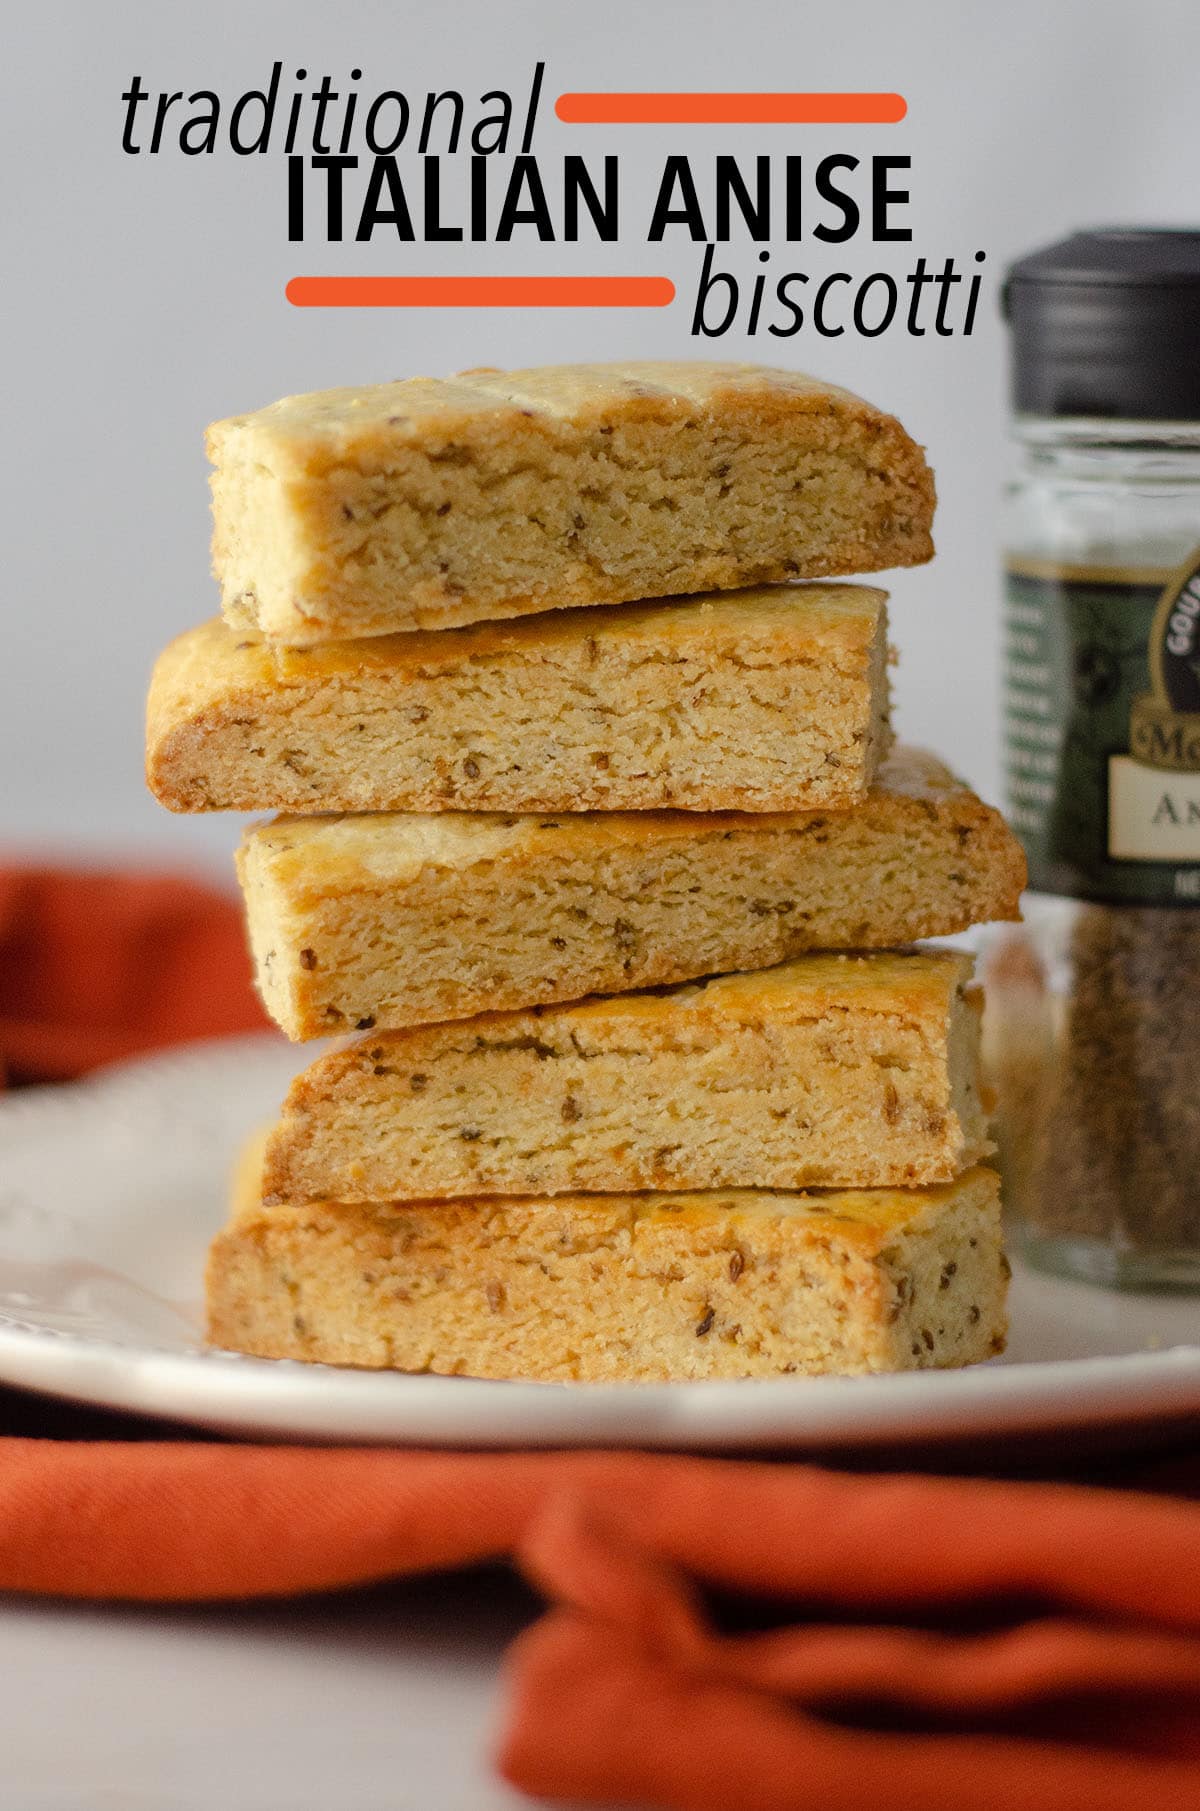 Traditional Italian Anise Biscotti: Basic biscotti cookies flavored with anise extract and anise seed. via @frshaprilflours